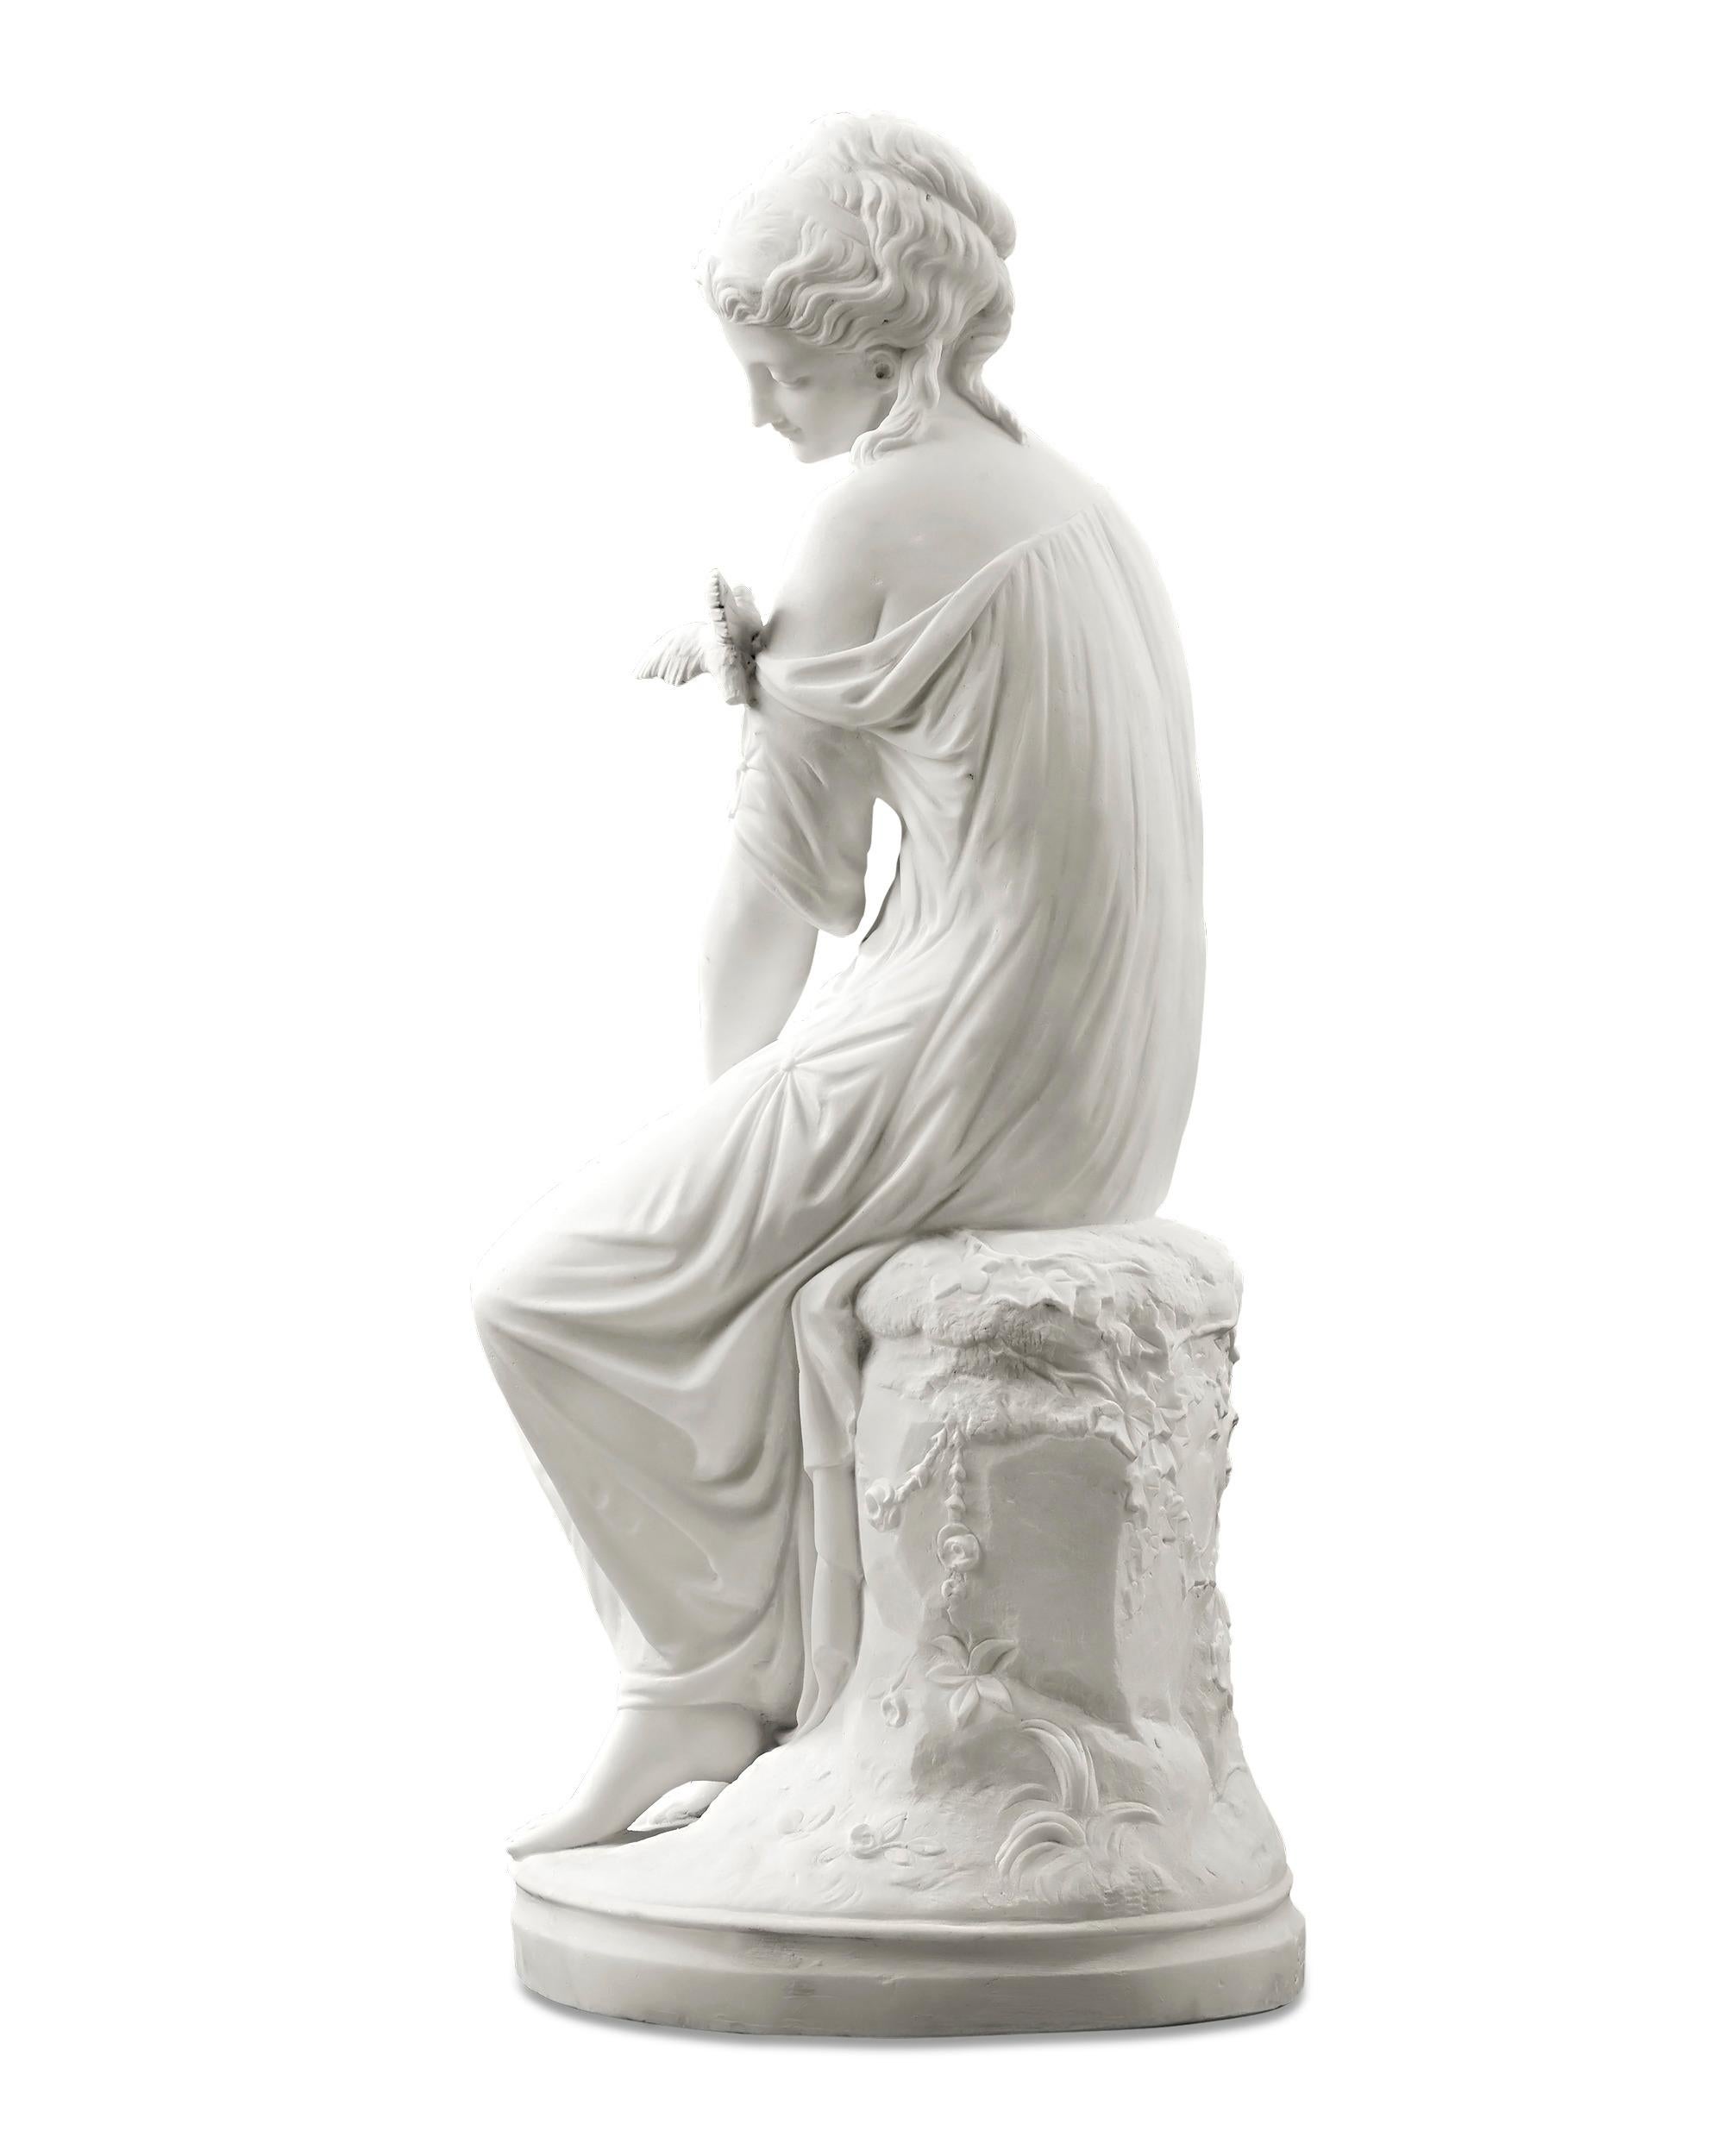 Signed and dated “Jacques Pradier / 1820”

This tranquil marble sculpture is by Swiss-French Neoclassical sculptor Jean-Jacques Pradier. Created in 1820, this work depicts a lovely young woman feeding a friendly songbird that has landed on her arm.